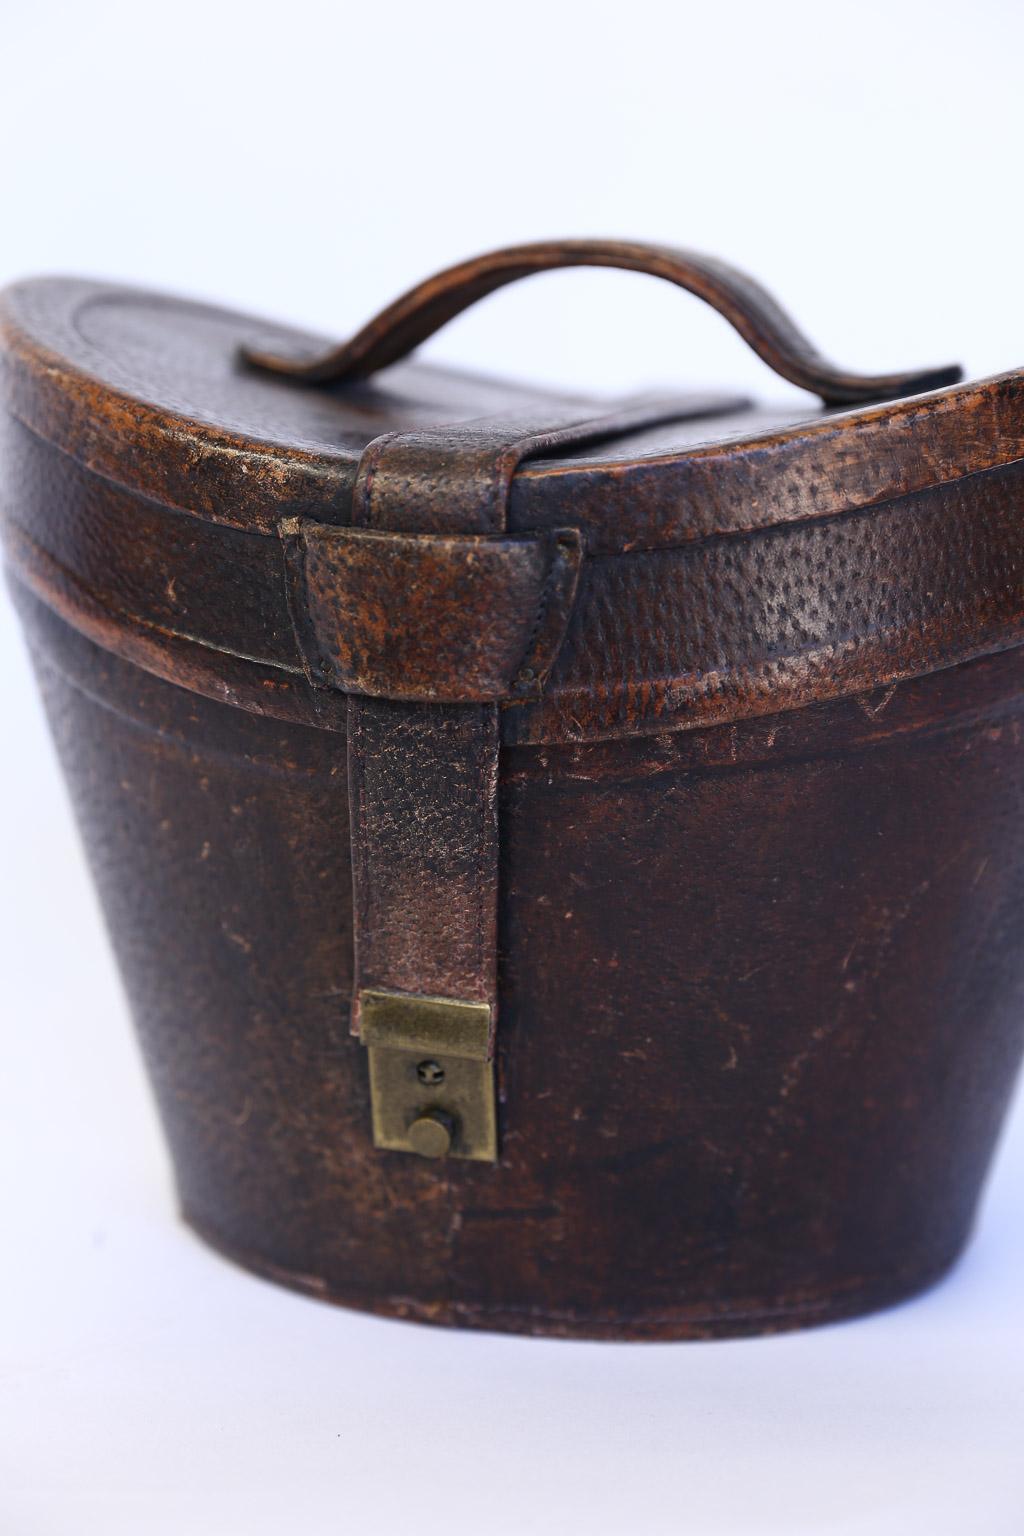 This is a beautiful English leather hat box. It was once used to store a top hat. The box is in good condition with a front brass lock and leather carrying handle on the top. The box is lined with velvet and ready to store your hat or display in